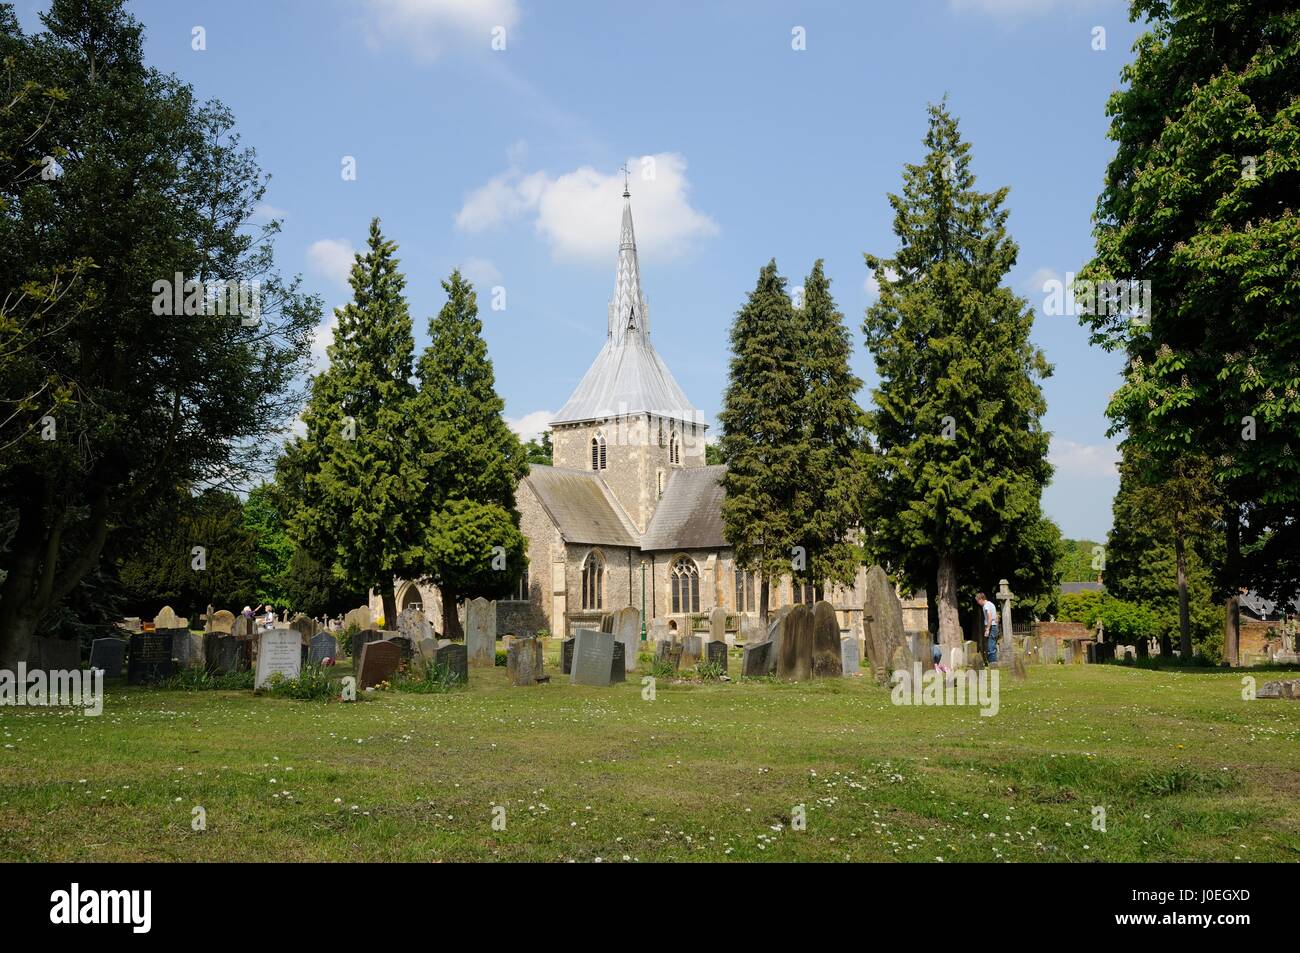 St Helens Church, Wheathampstead, Hertfordshire, stands at the centre of the village in an unusually  large churchyard. Stock Photo